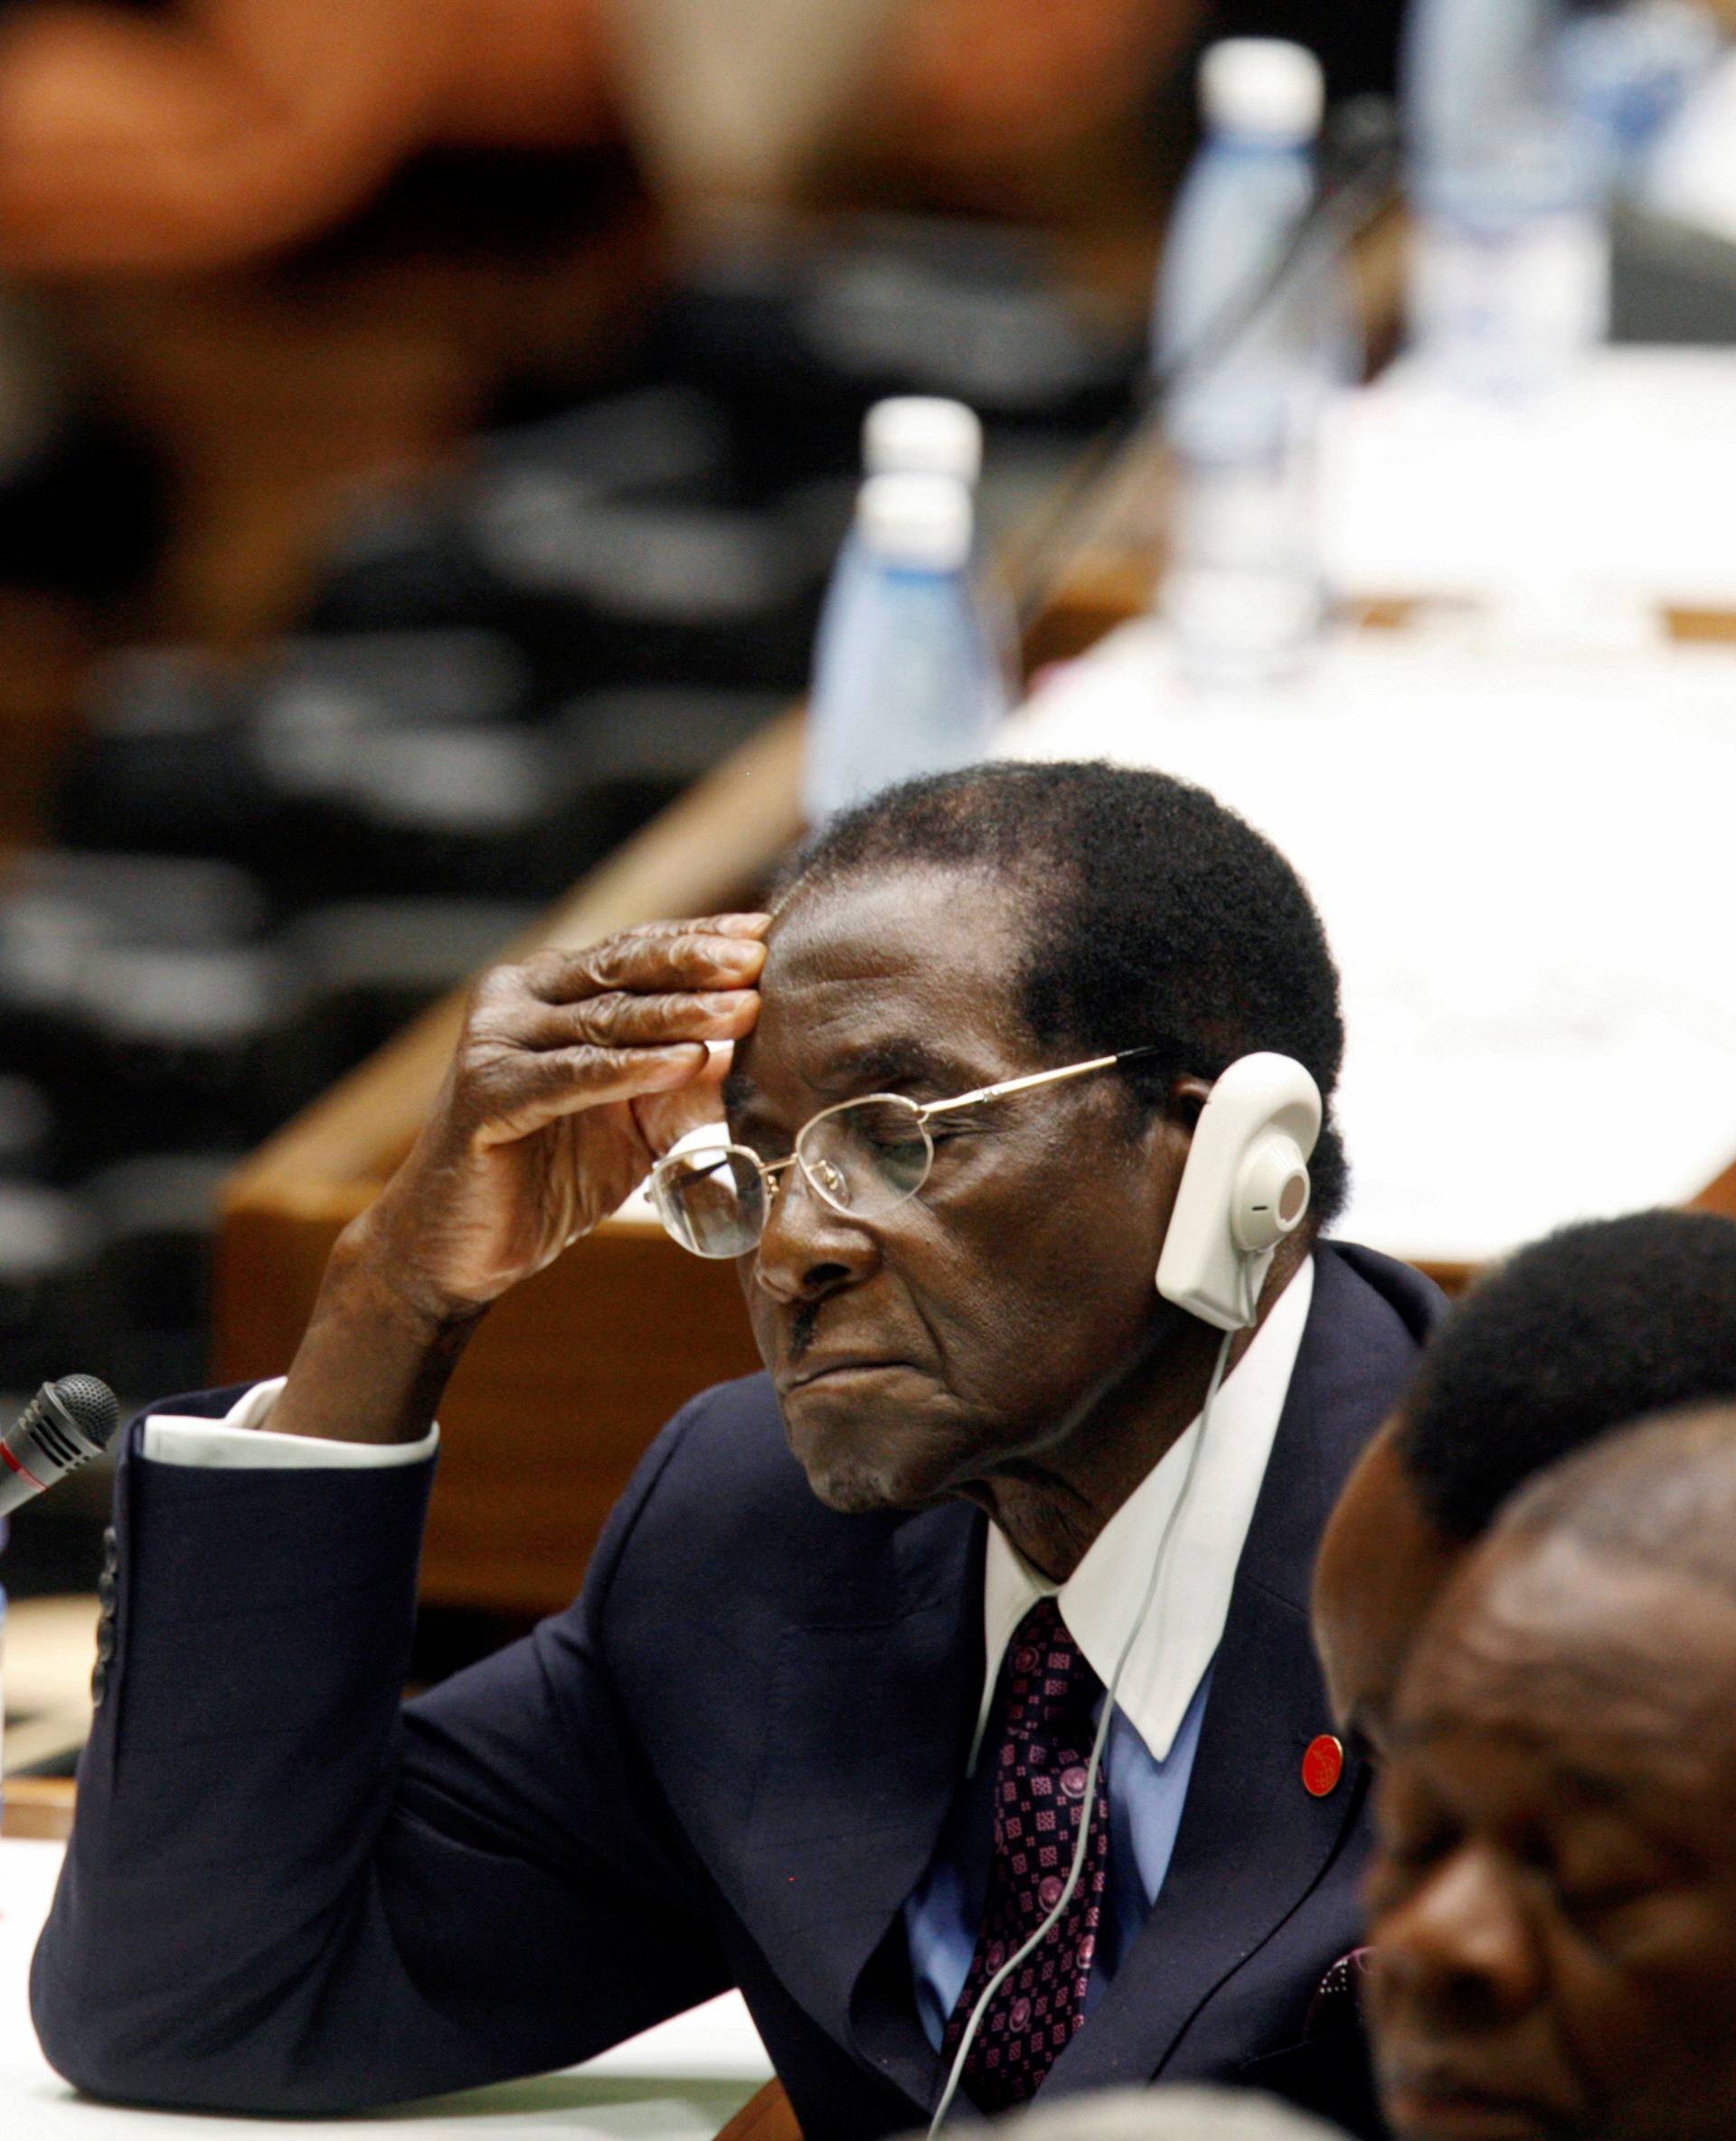 FILE PHOTO -  File photo of Zimbabwe's President Robert Mugabe closing his eyes as he listens to Castro's closing statement in Havana